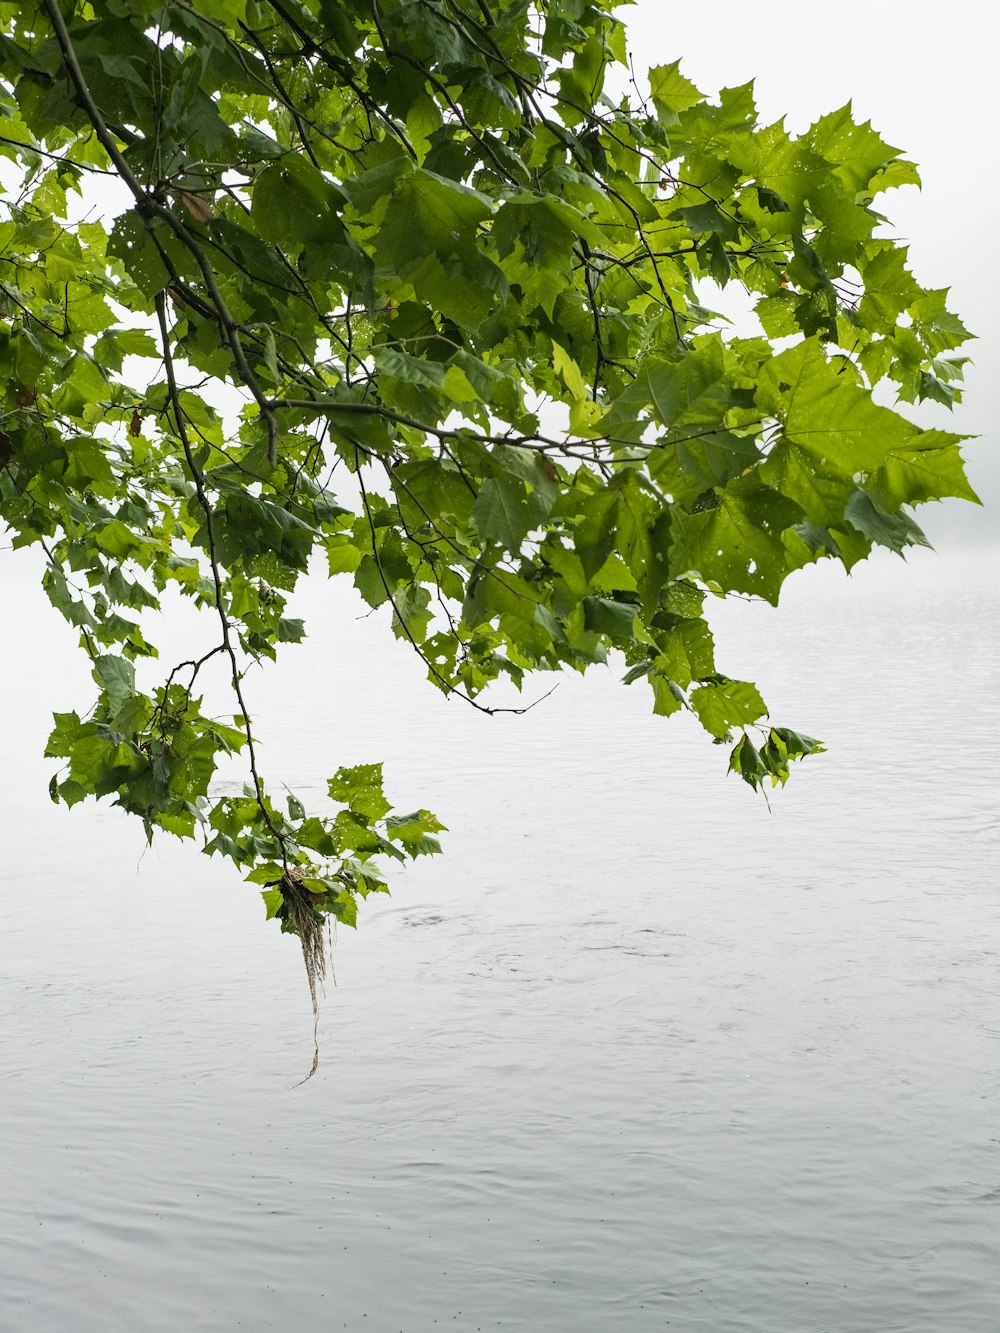 green leaf tree near body of water during daytime